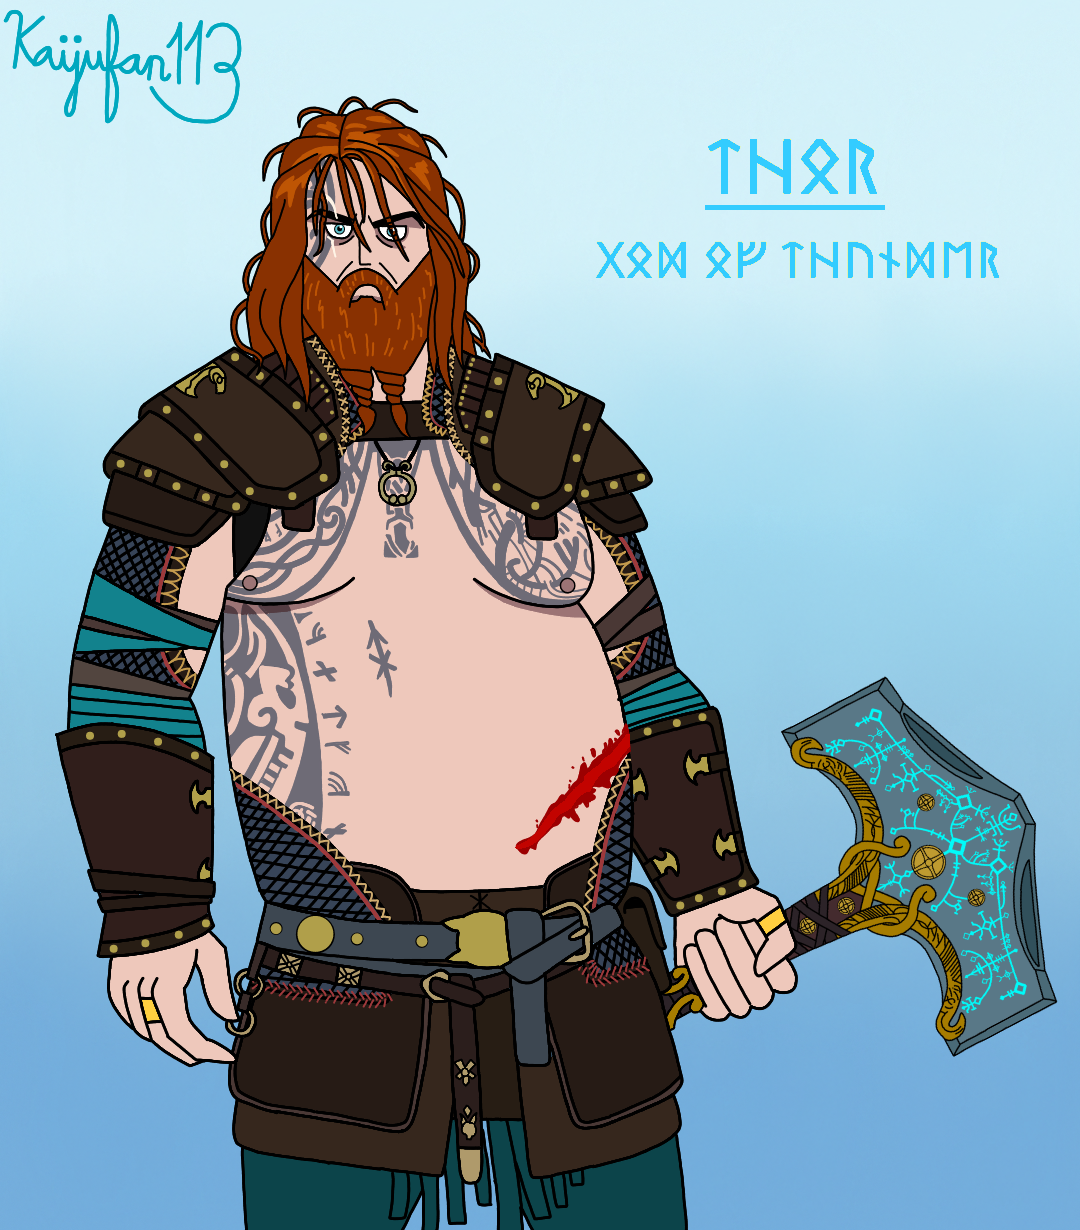 Thor God of War by wingzerox86 on DeviantArt